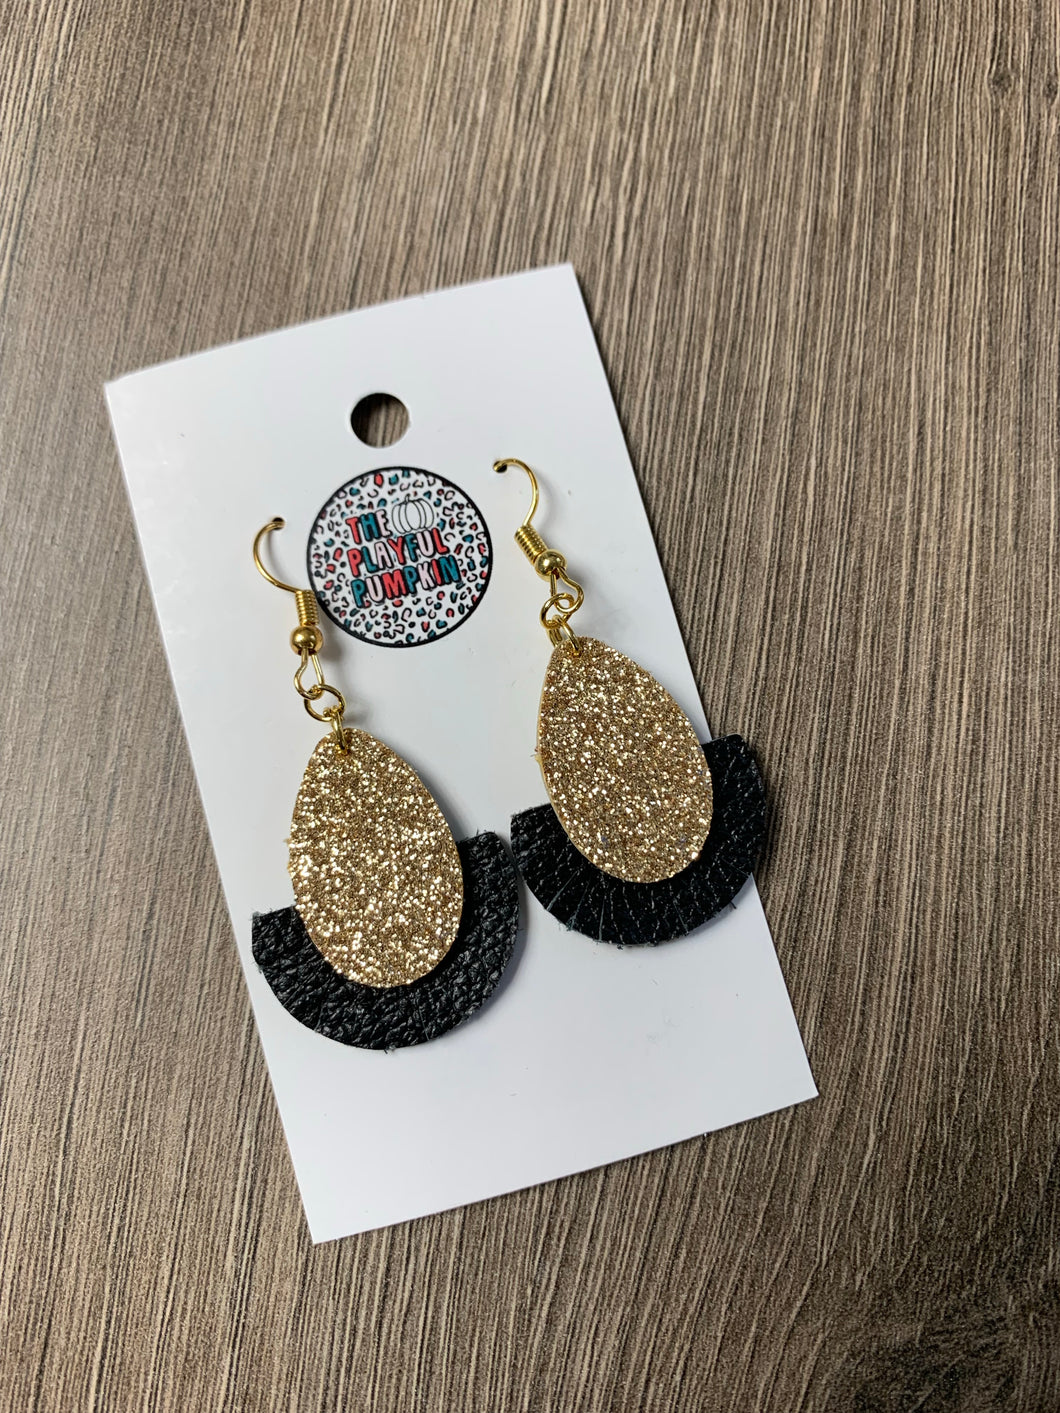 Small Black and Gold Leather Earrings